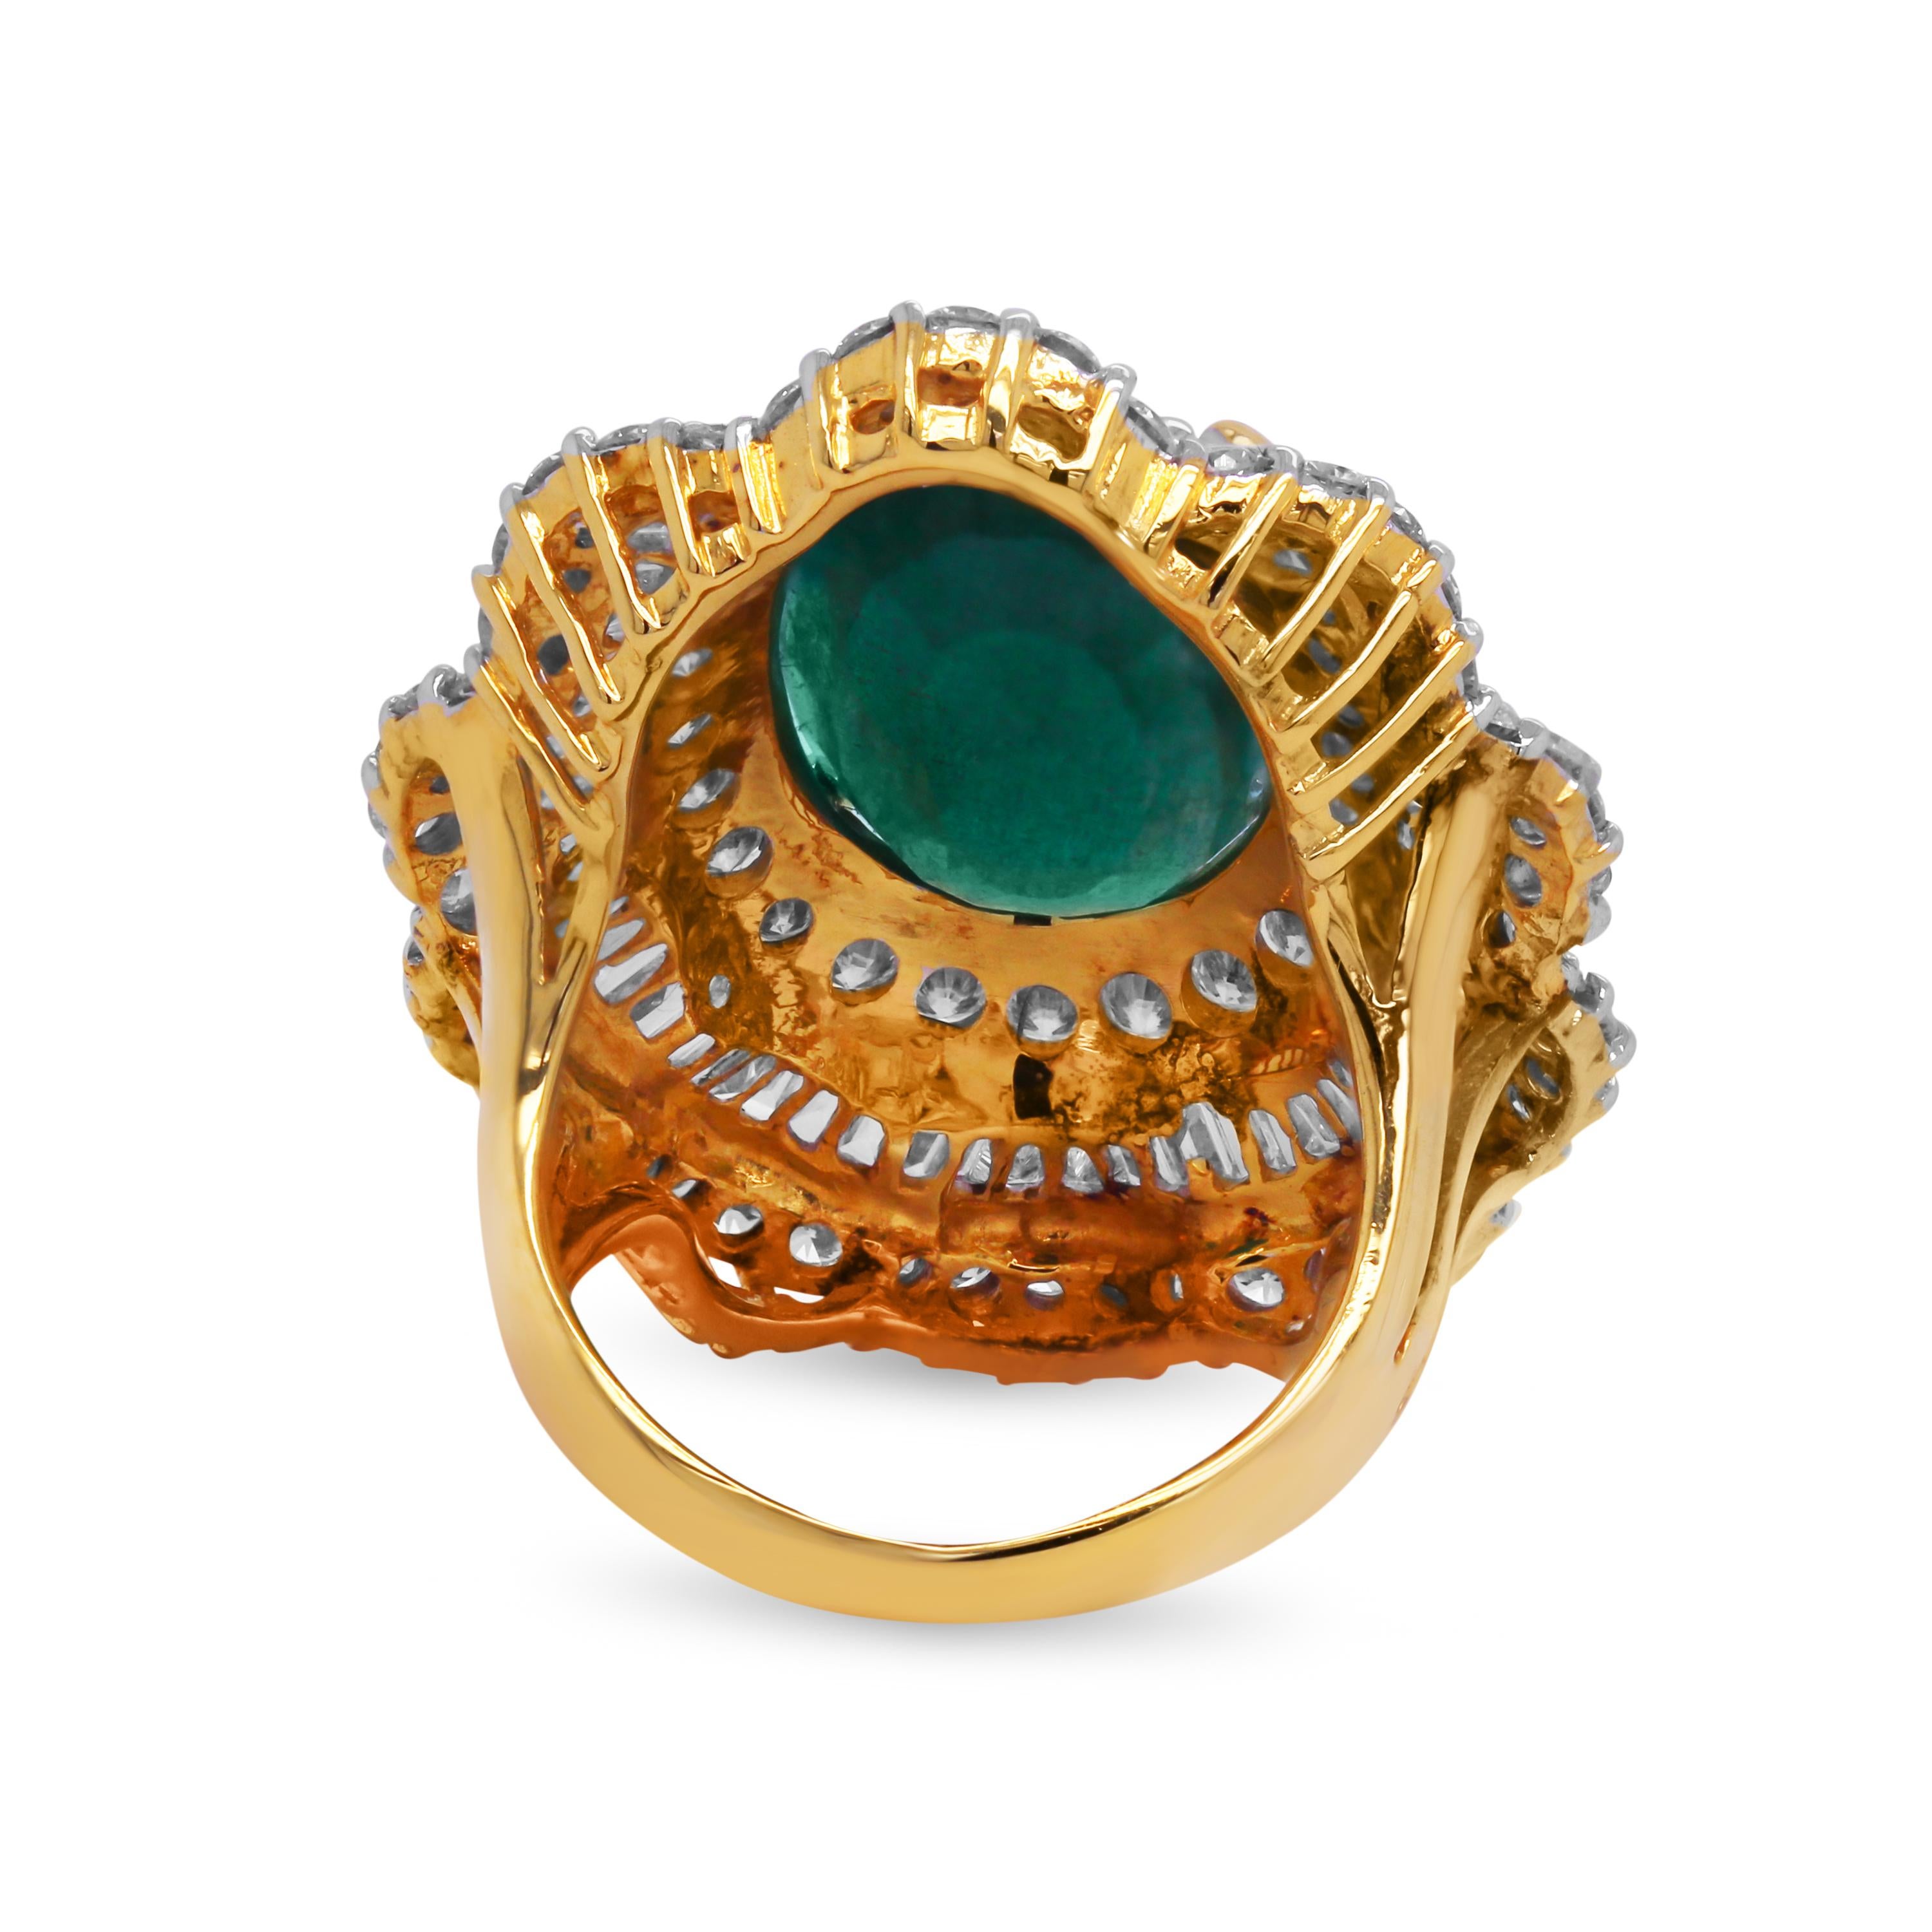 18K Gold Baguette Round Diamond Oval 8 Carat Emerald Center Cocktail Ring In Excellent Condition For Sale In Boca Raton, FL